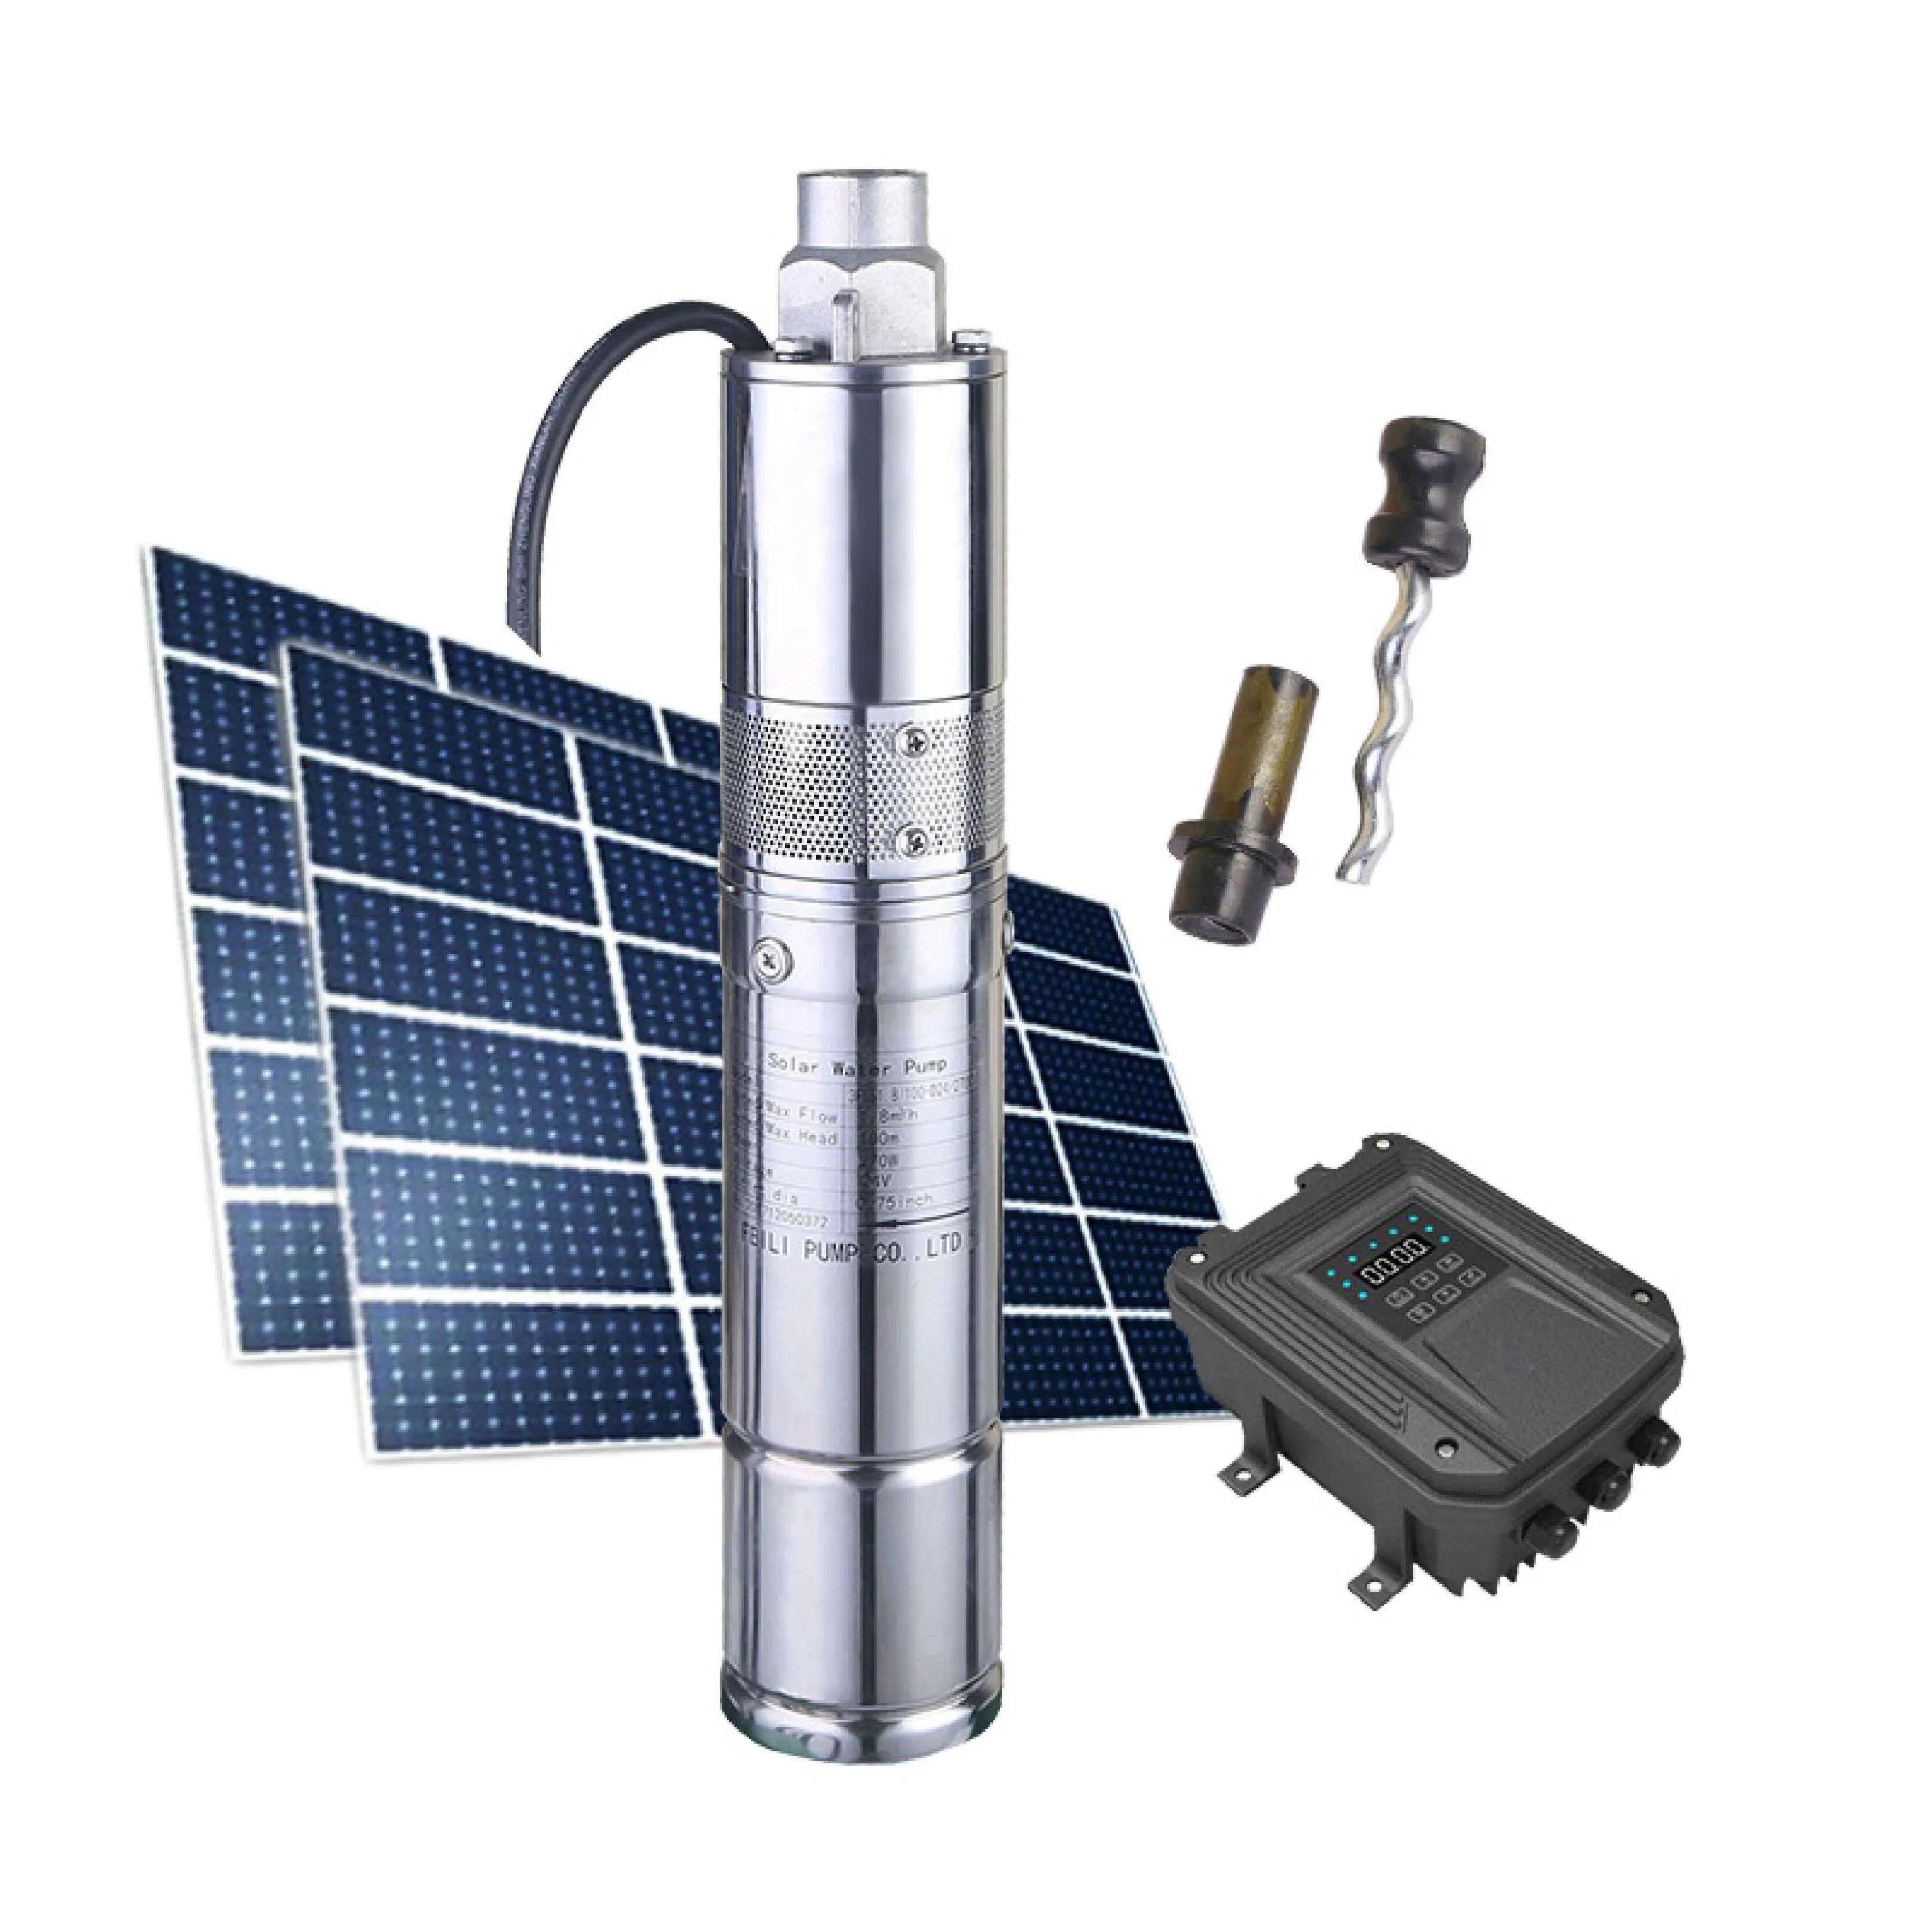 Submersible solar energy water pump for solar panel , farm use heavy duty submissible 0.5hp solar water pump kit for deep well